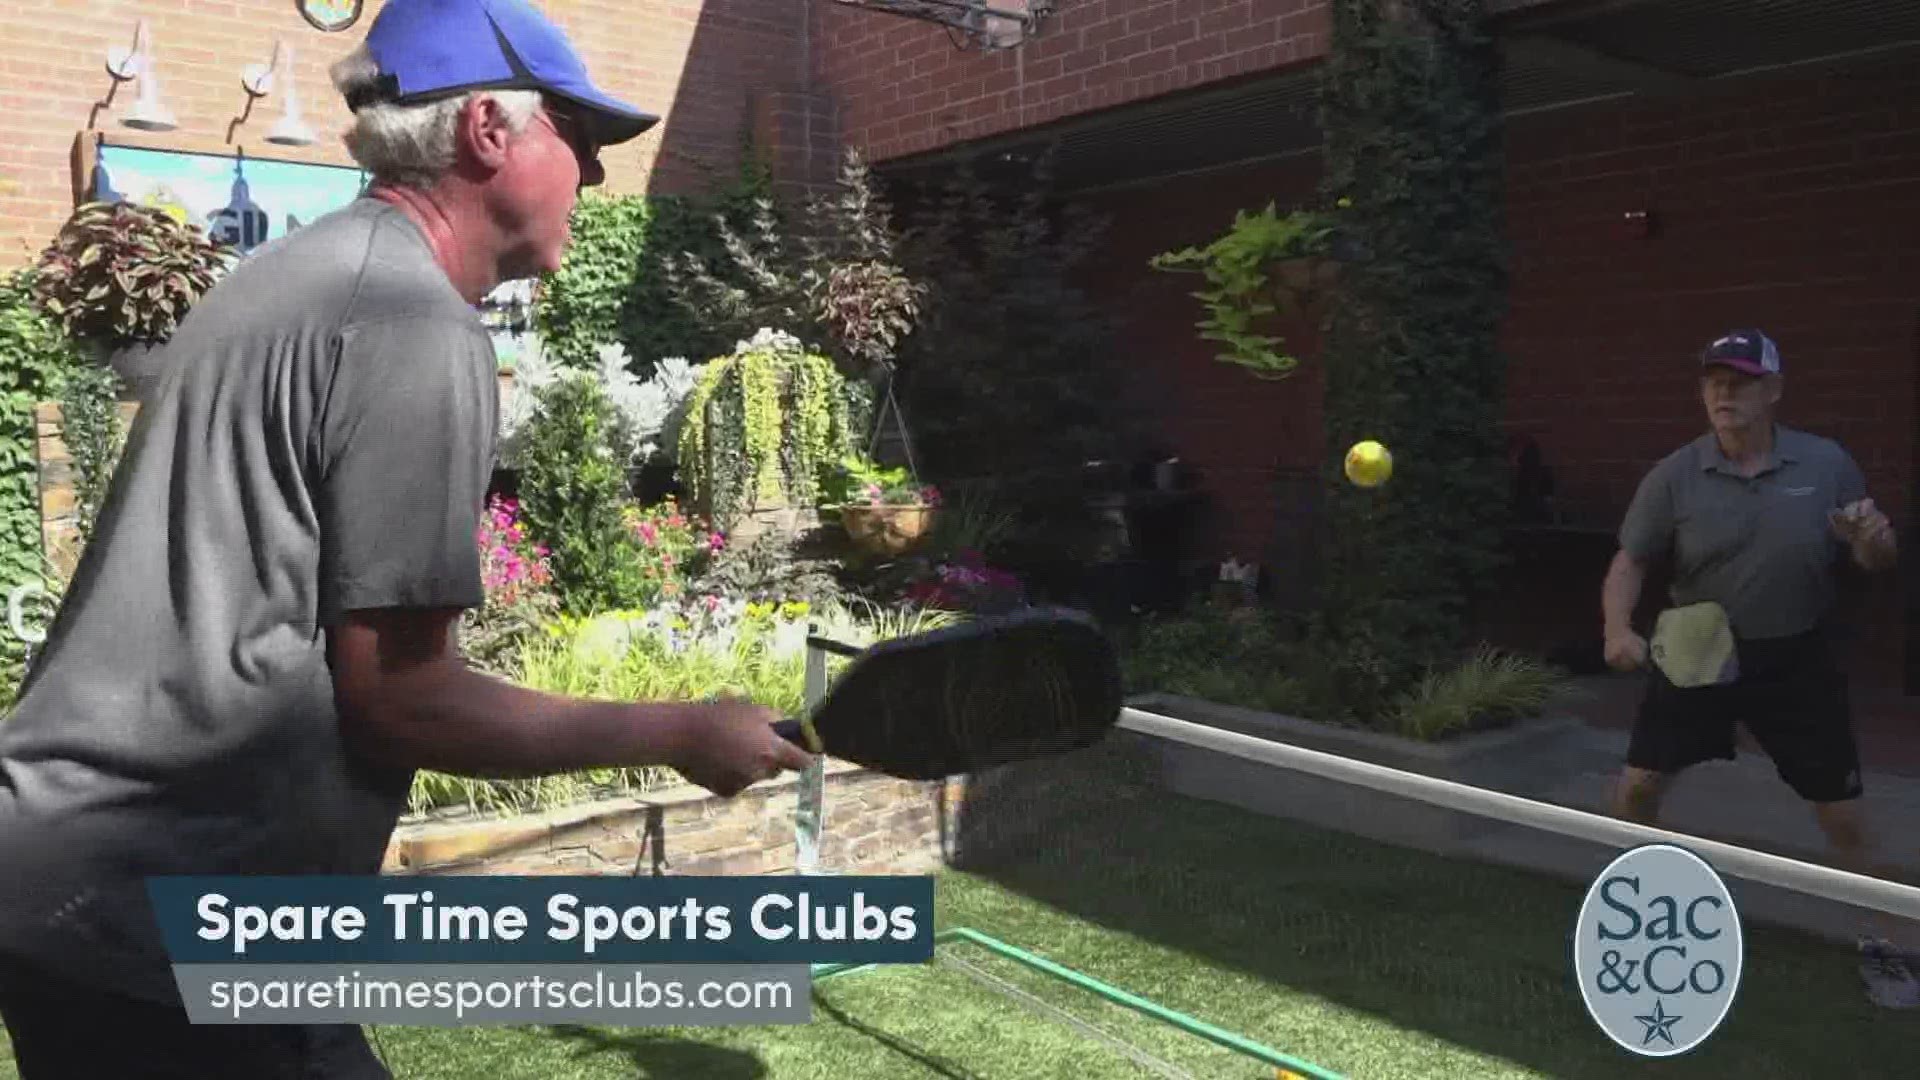 Melissa Crowley got educated on the historical workout “Pickle-Ball” which is becoming more and more popular! The following is a paid segment sponsored by Spare Time Sports Clubs.